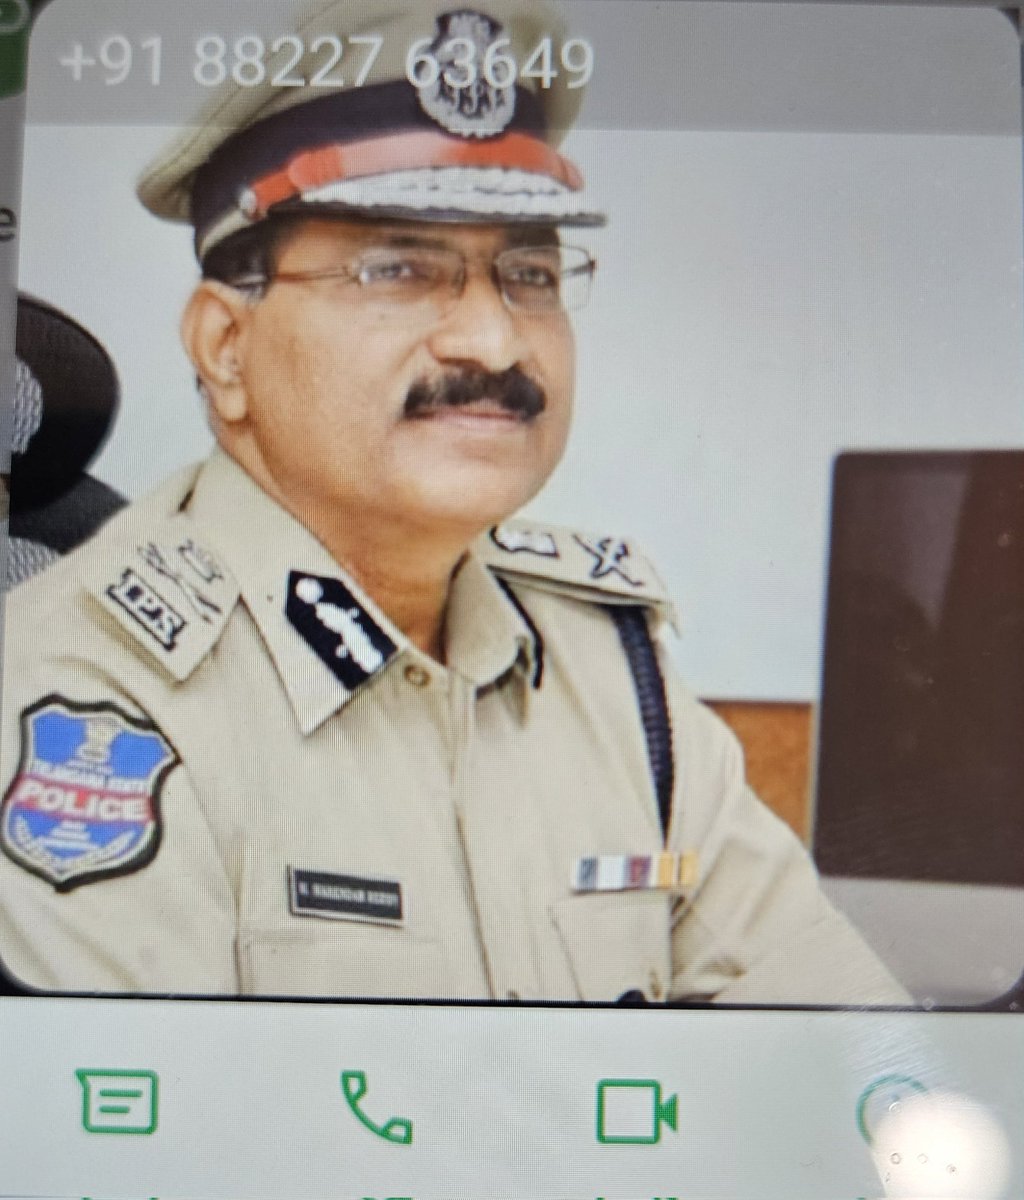 Senior Citizens beware. There has been a spurt of fake calls from cyber criminals faking themselves as #police and #enforcement officers asking for Ransom. My mother just got a call telling that her son is arrested and to pay 5 lacs online immediately else see her son langusih in…